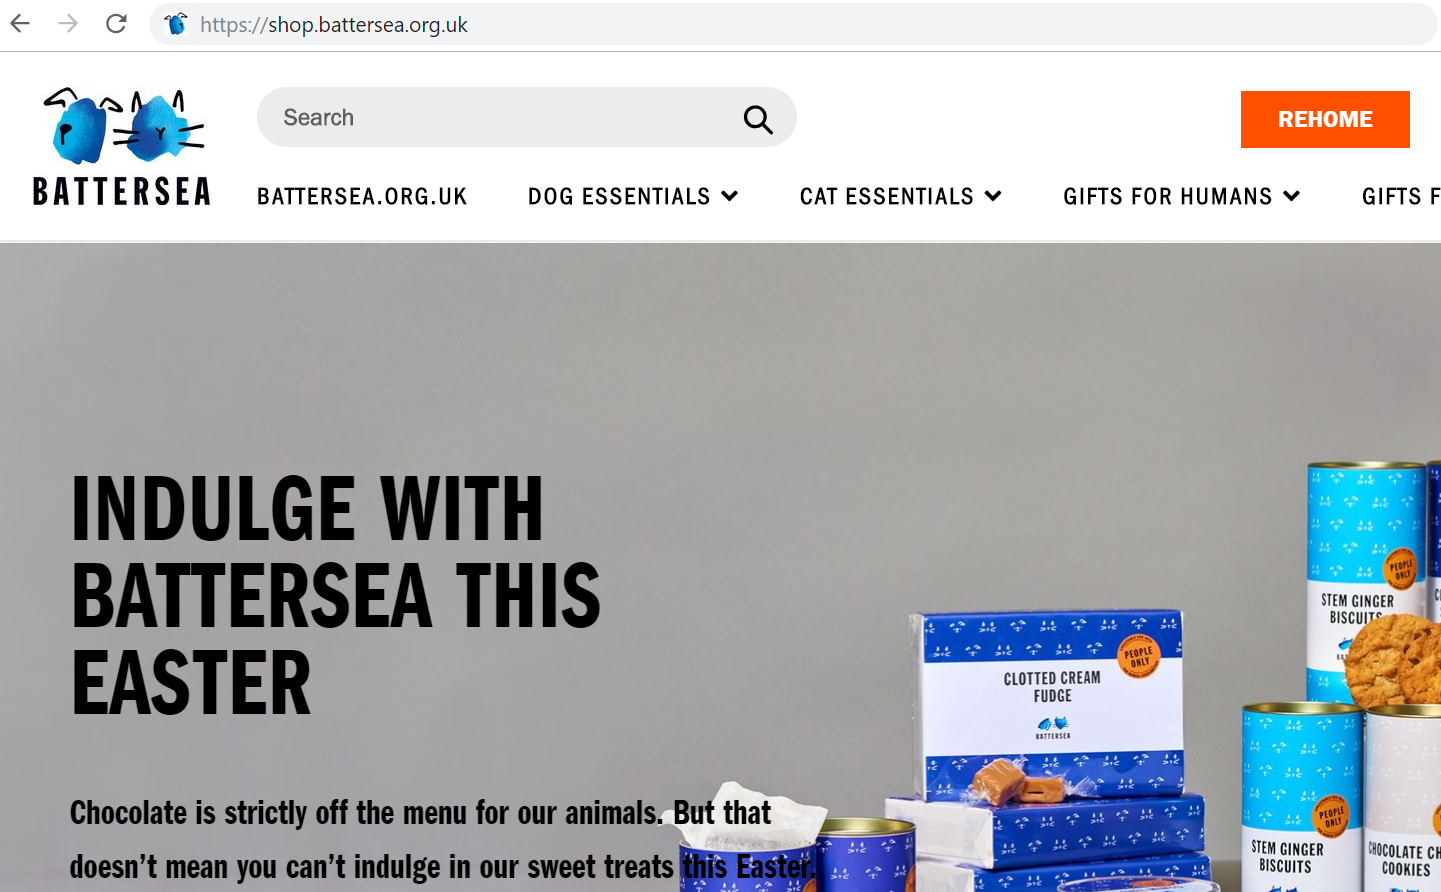 A screenshot of Battersea's Shopify store, which is housed under a subdomain.